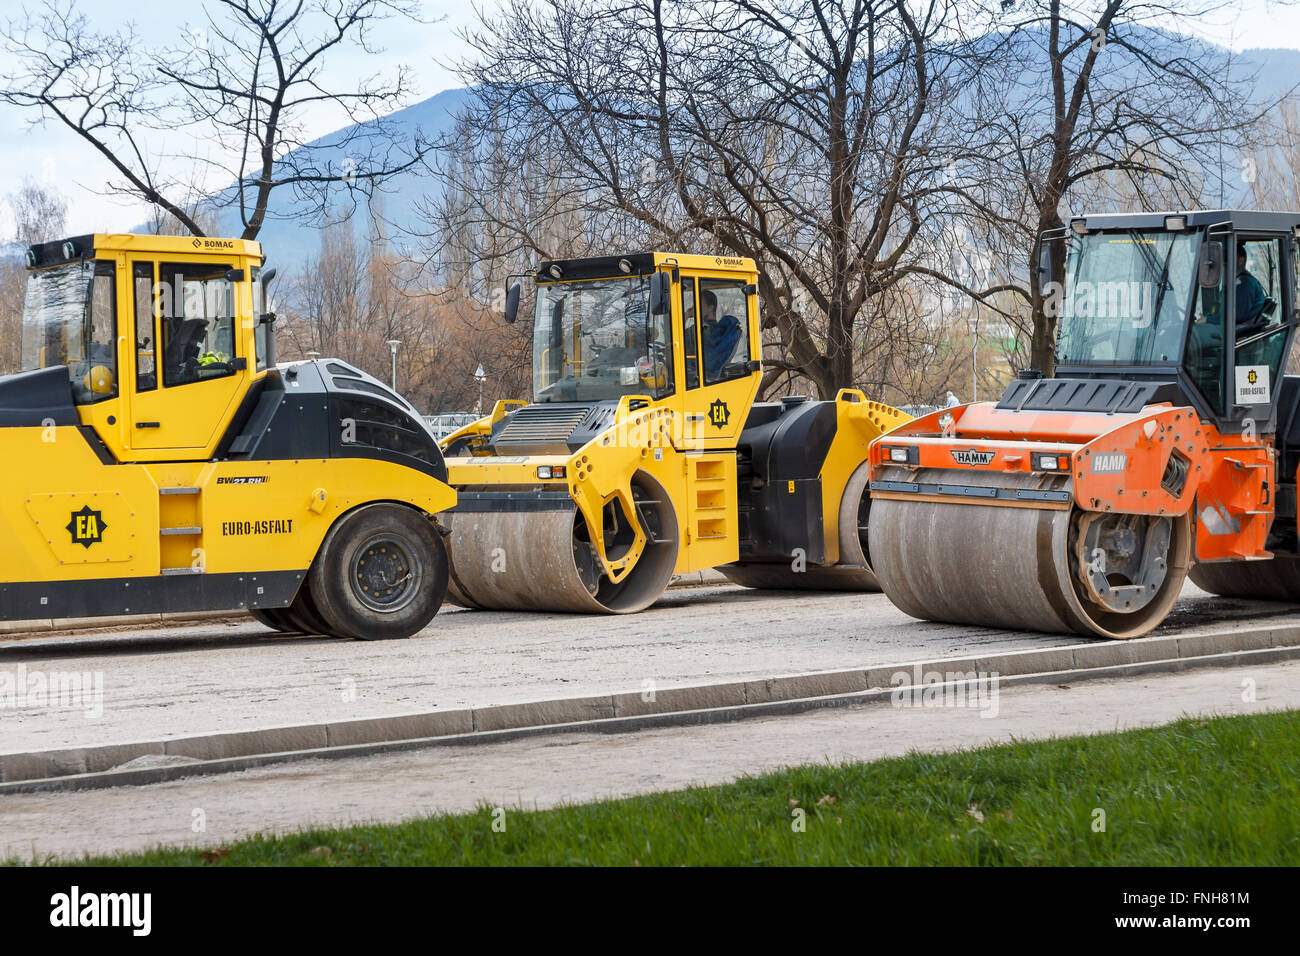 Road construction vehicles, yellow and orange road rollers Stock Photo